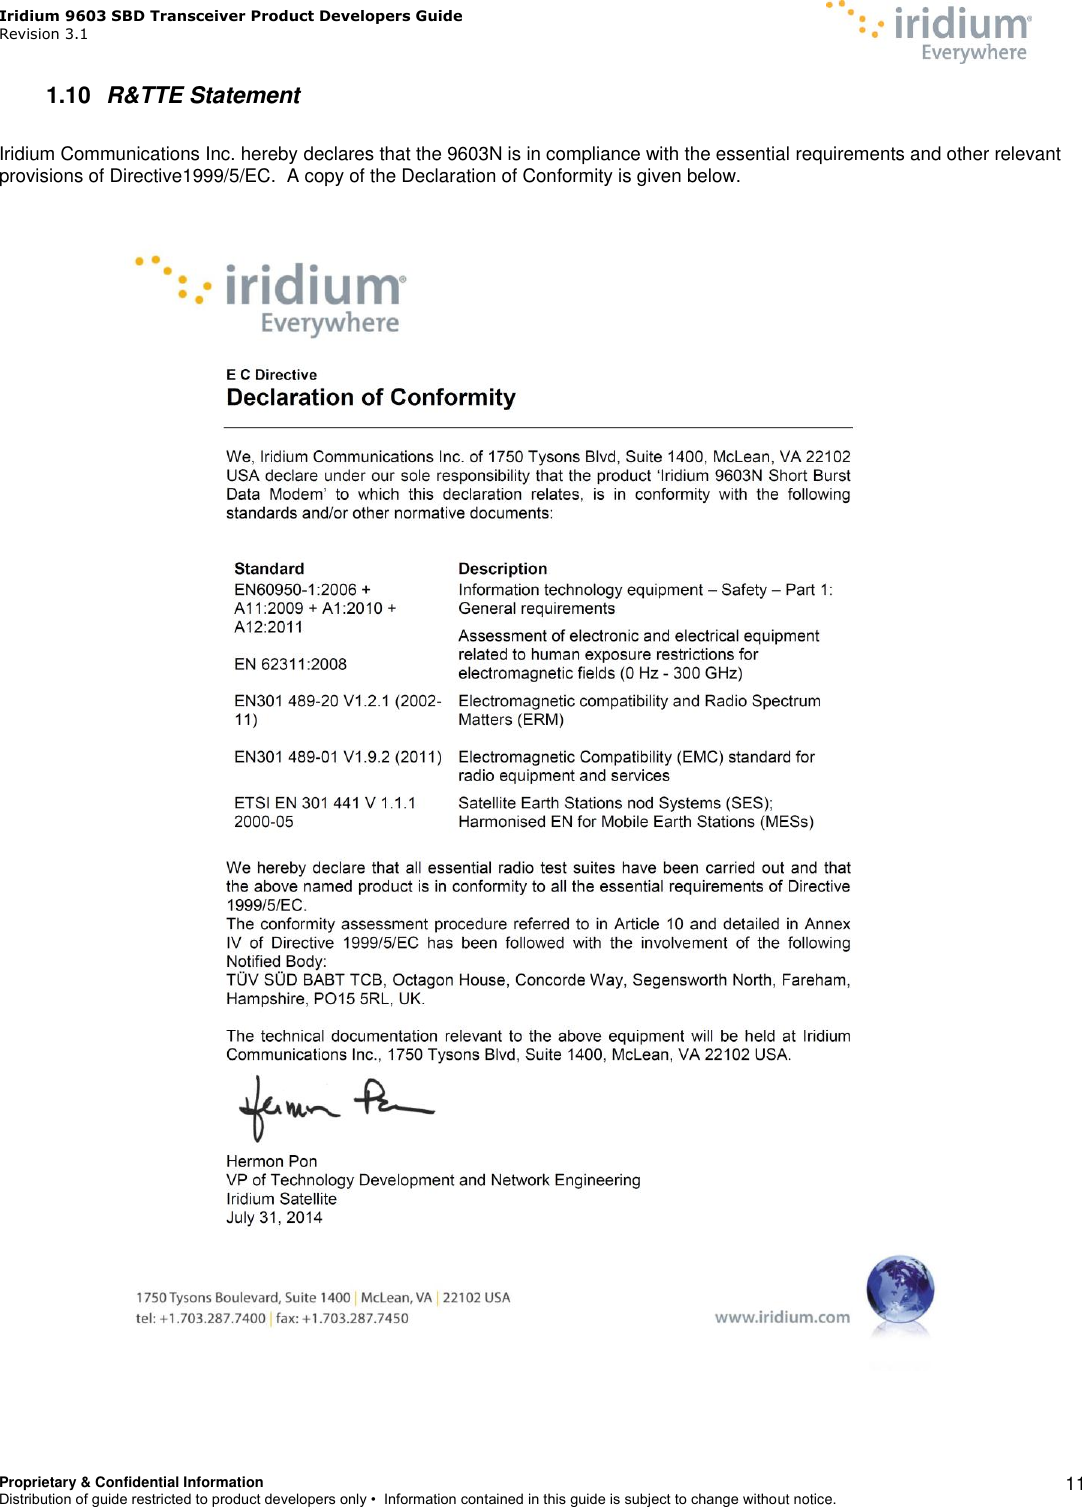 Iridium 9603 SBD Transceiver Product Developers Guide                                                Revision 3.1 Proprietary &amp; Confidential Information Distribution of guide restricted to product developers only •  Information contained in this guide is subject to change without notice.    11 1.10  R&amp;TTE Statement  Iridium Communications Inc. hereby declares that the 9603N is in compliance with the essential requirements and other relevant provisions of Directive1999/5/EC.  A copy of the Declaration of Conformity is given below.     